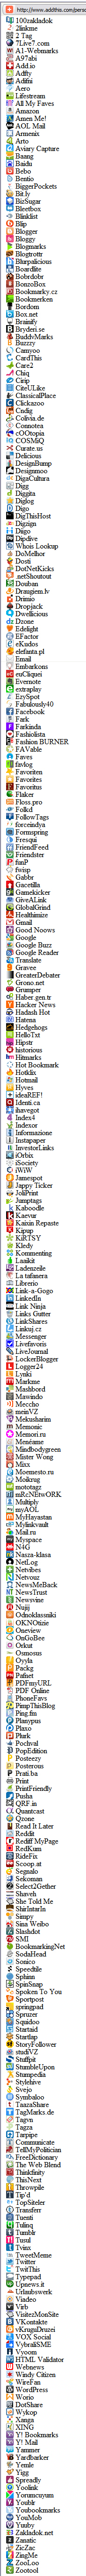 AddThis list of social media and web site sharing services